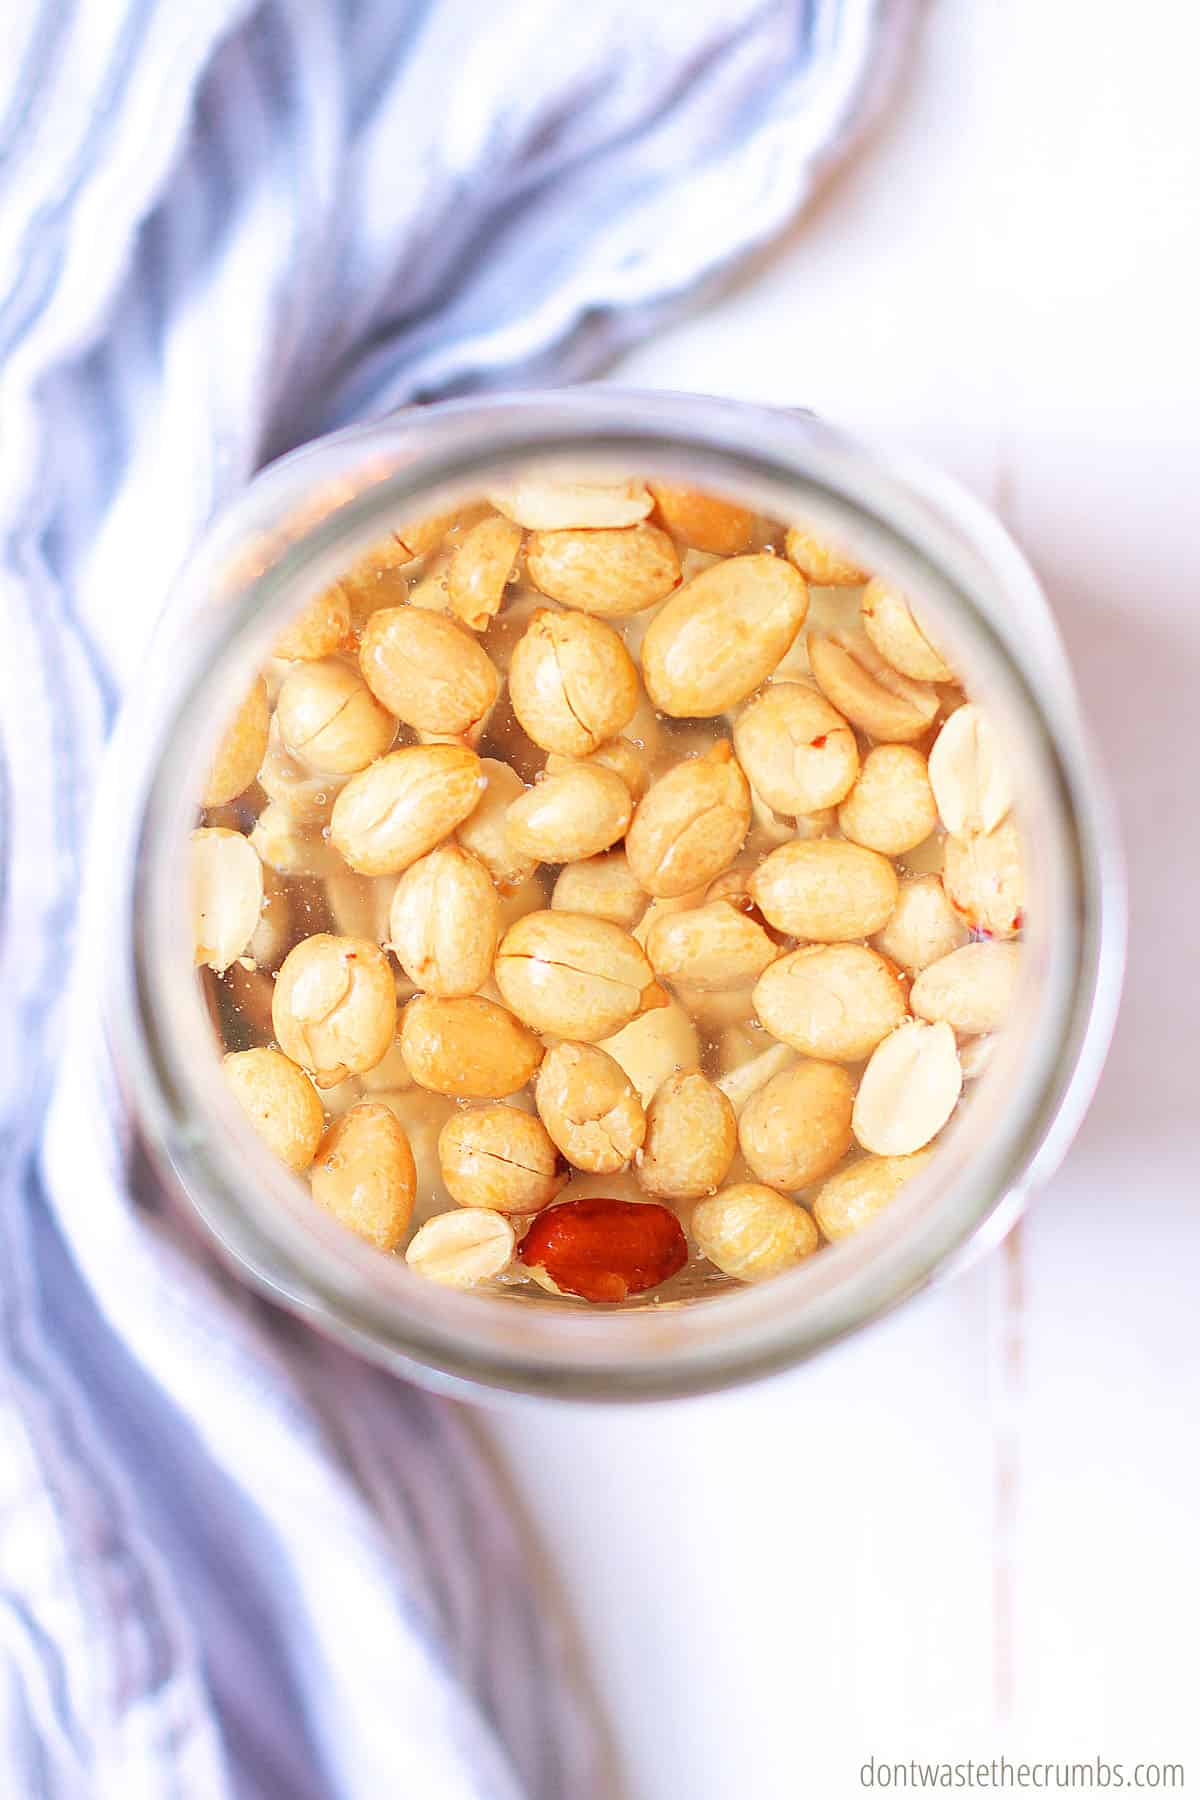 Whole peanuts soaking in a glass ball jar filled with water.